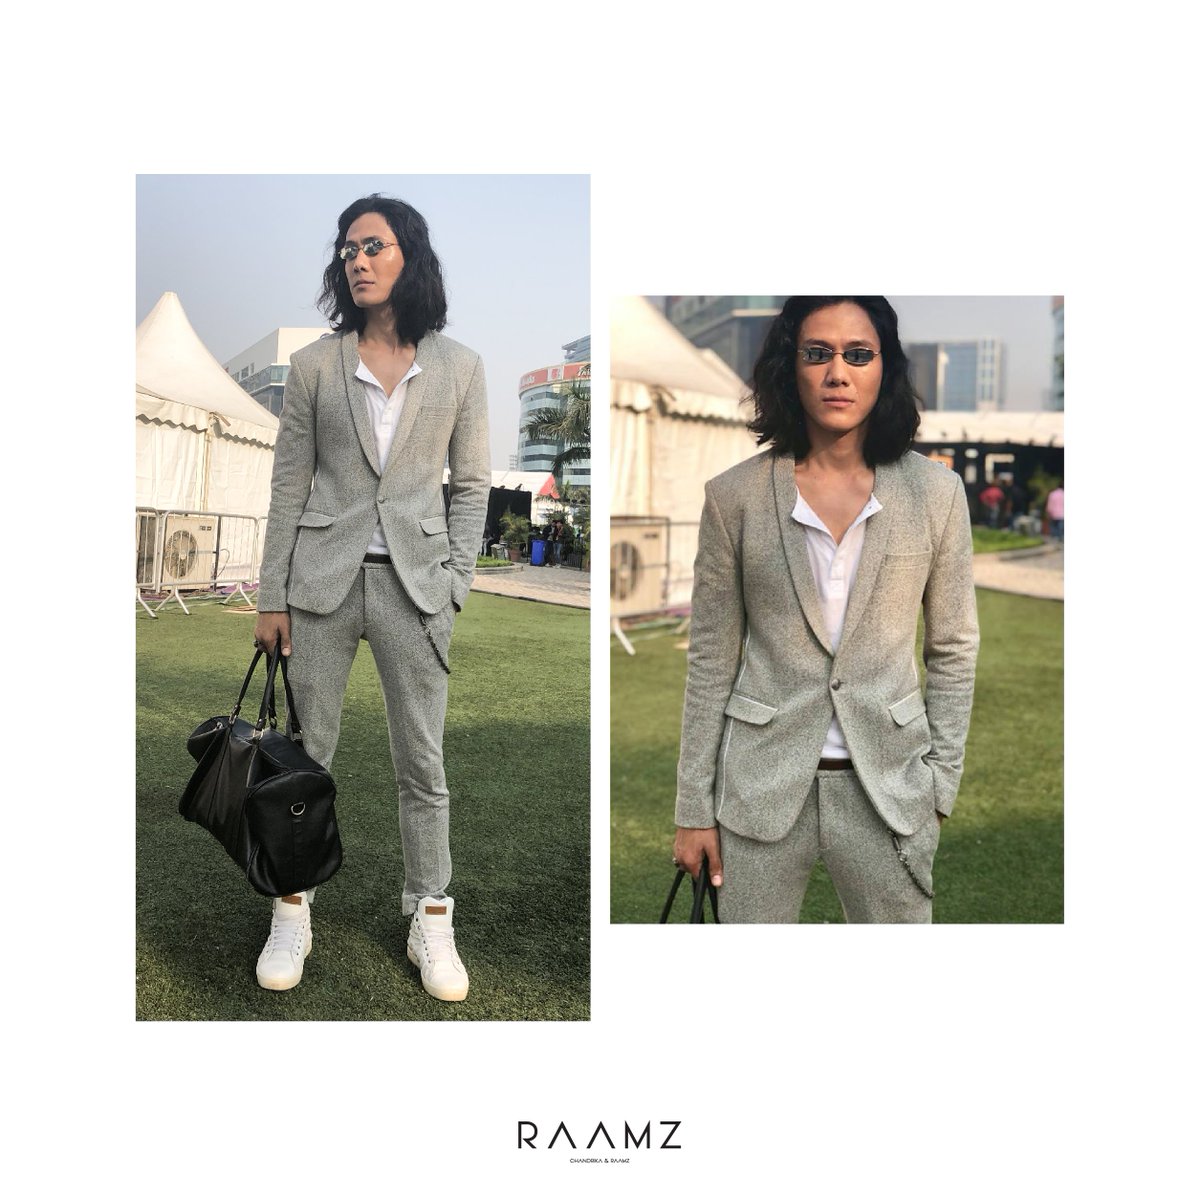 Zander, bringing out the best of work meets casual, in a Raamz Creation. #Raamz #RaamzOfficial #Lakme #FDCI #MensFashion #Designer #Hyderabad #MenWithClass #Style #Casual #Work #WorkMeetsCasual